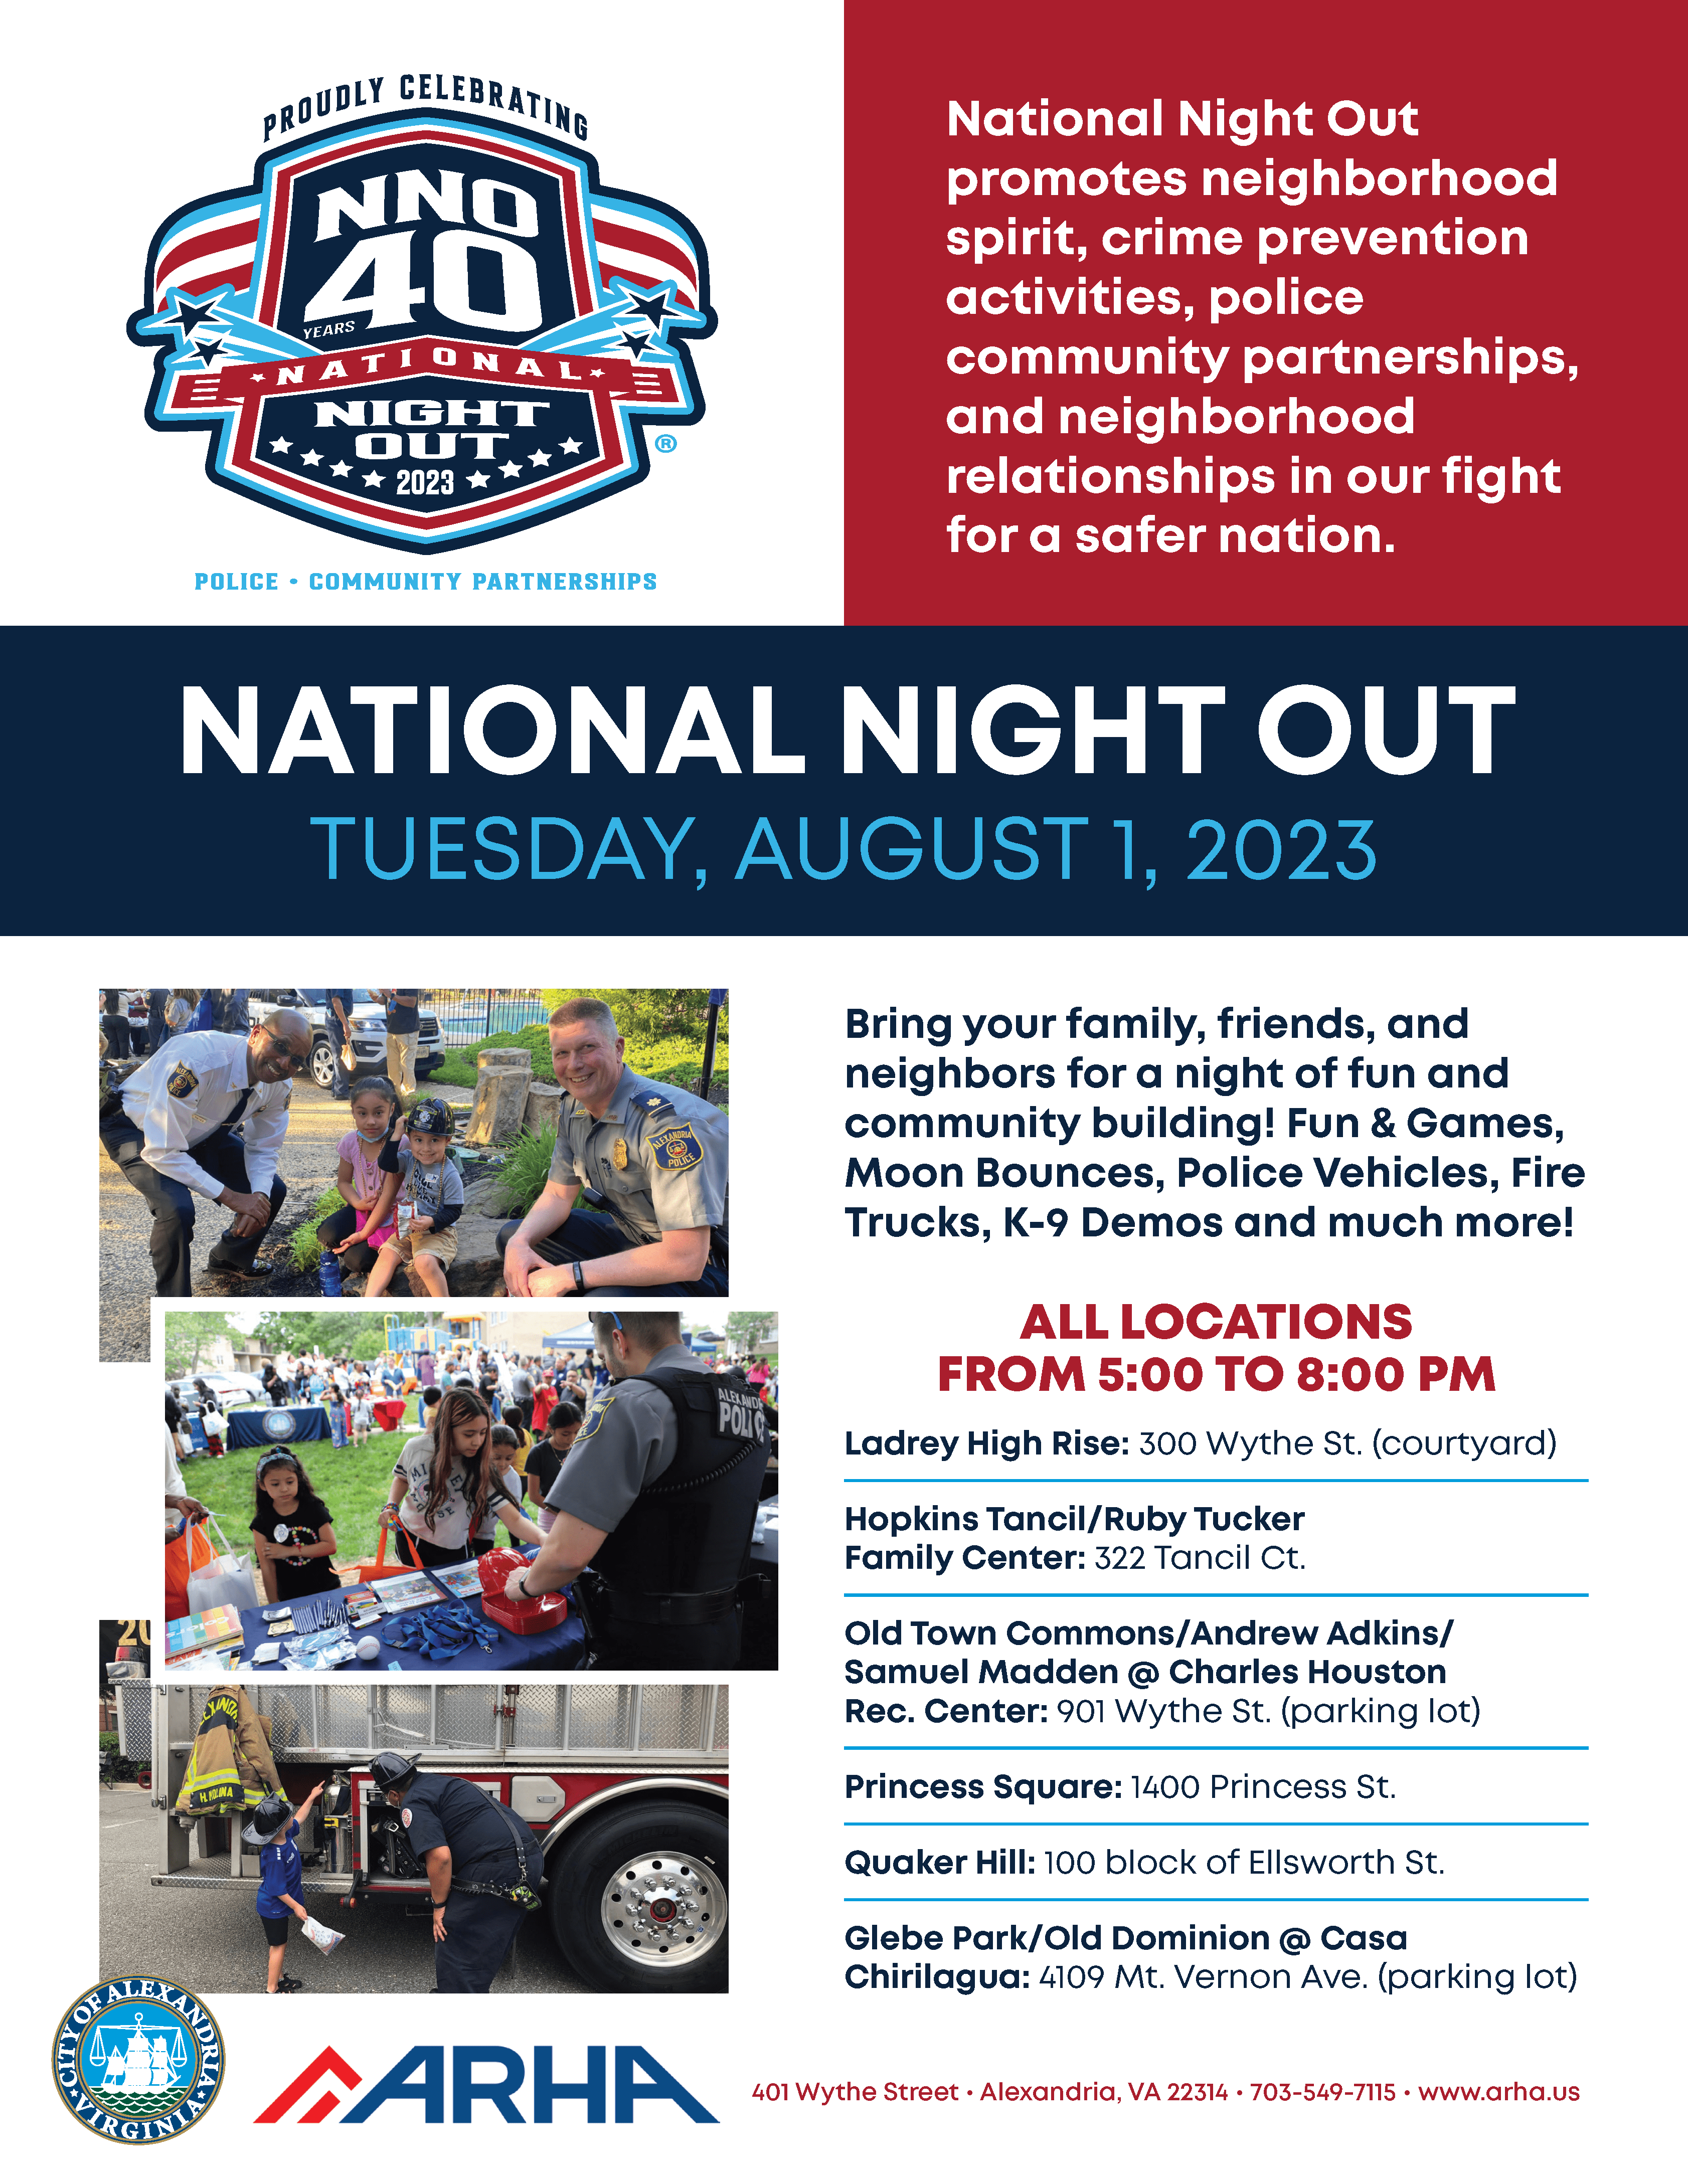 national night out flyer in english